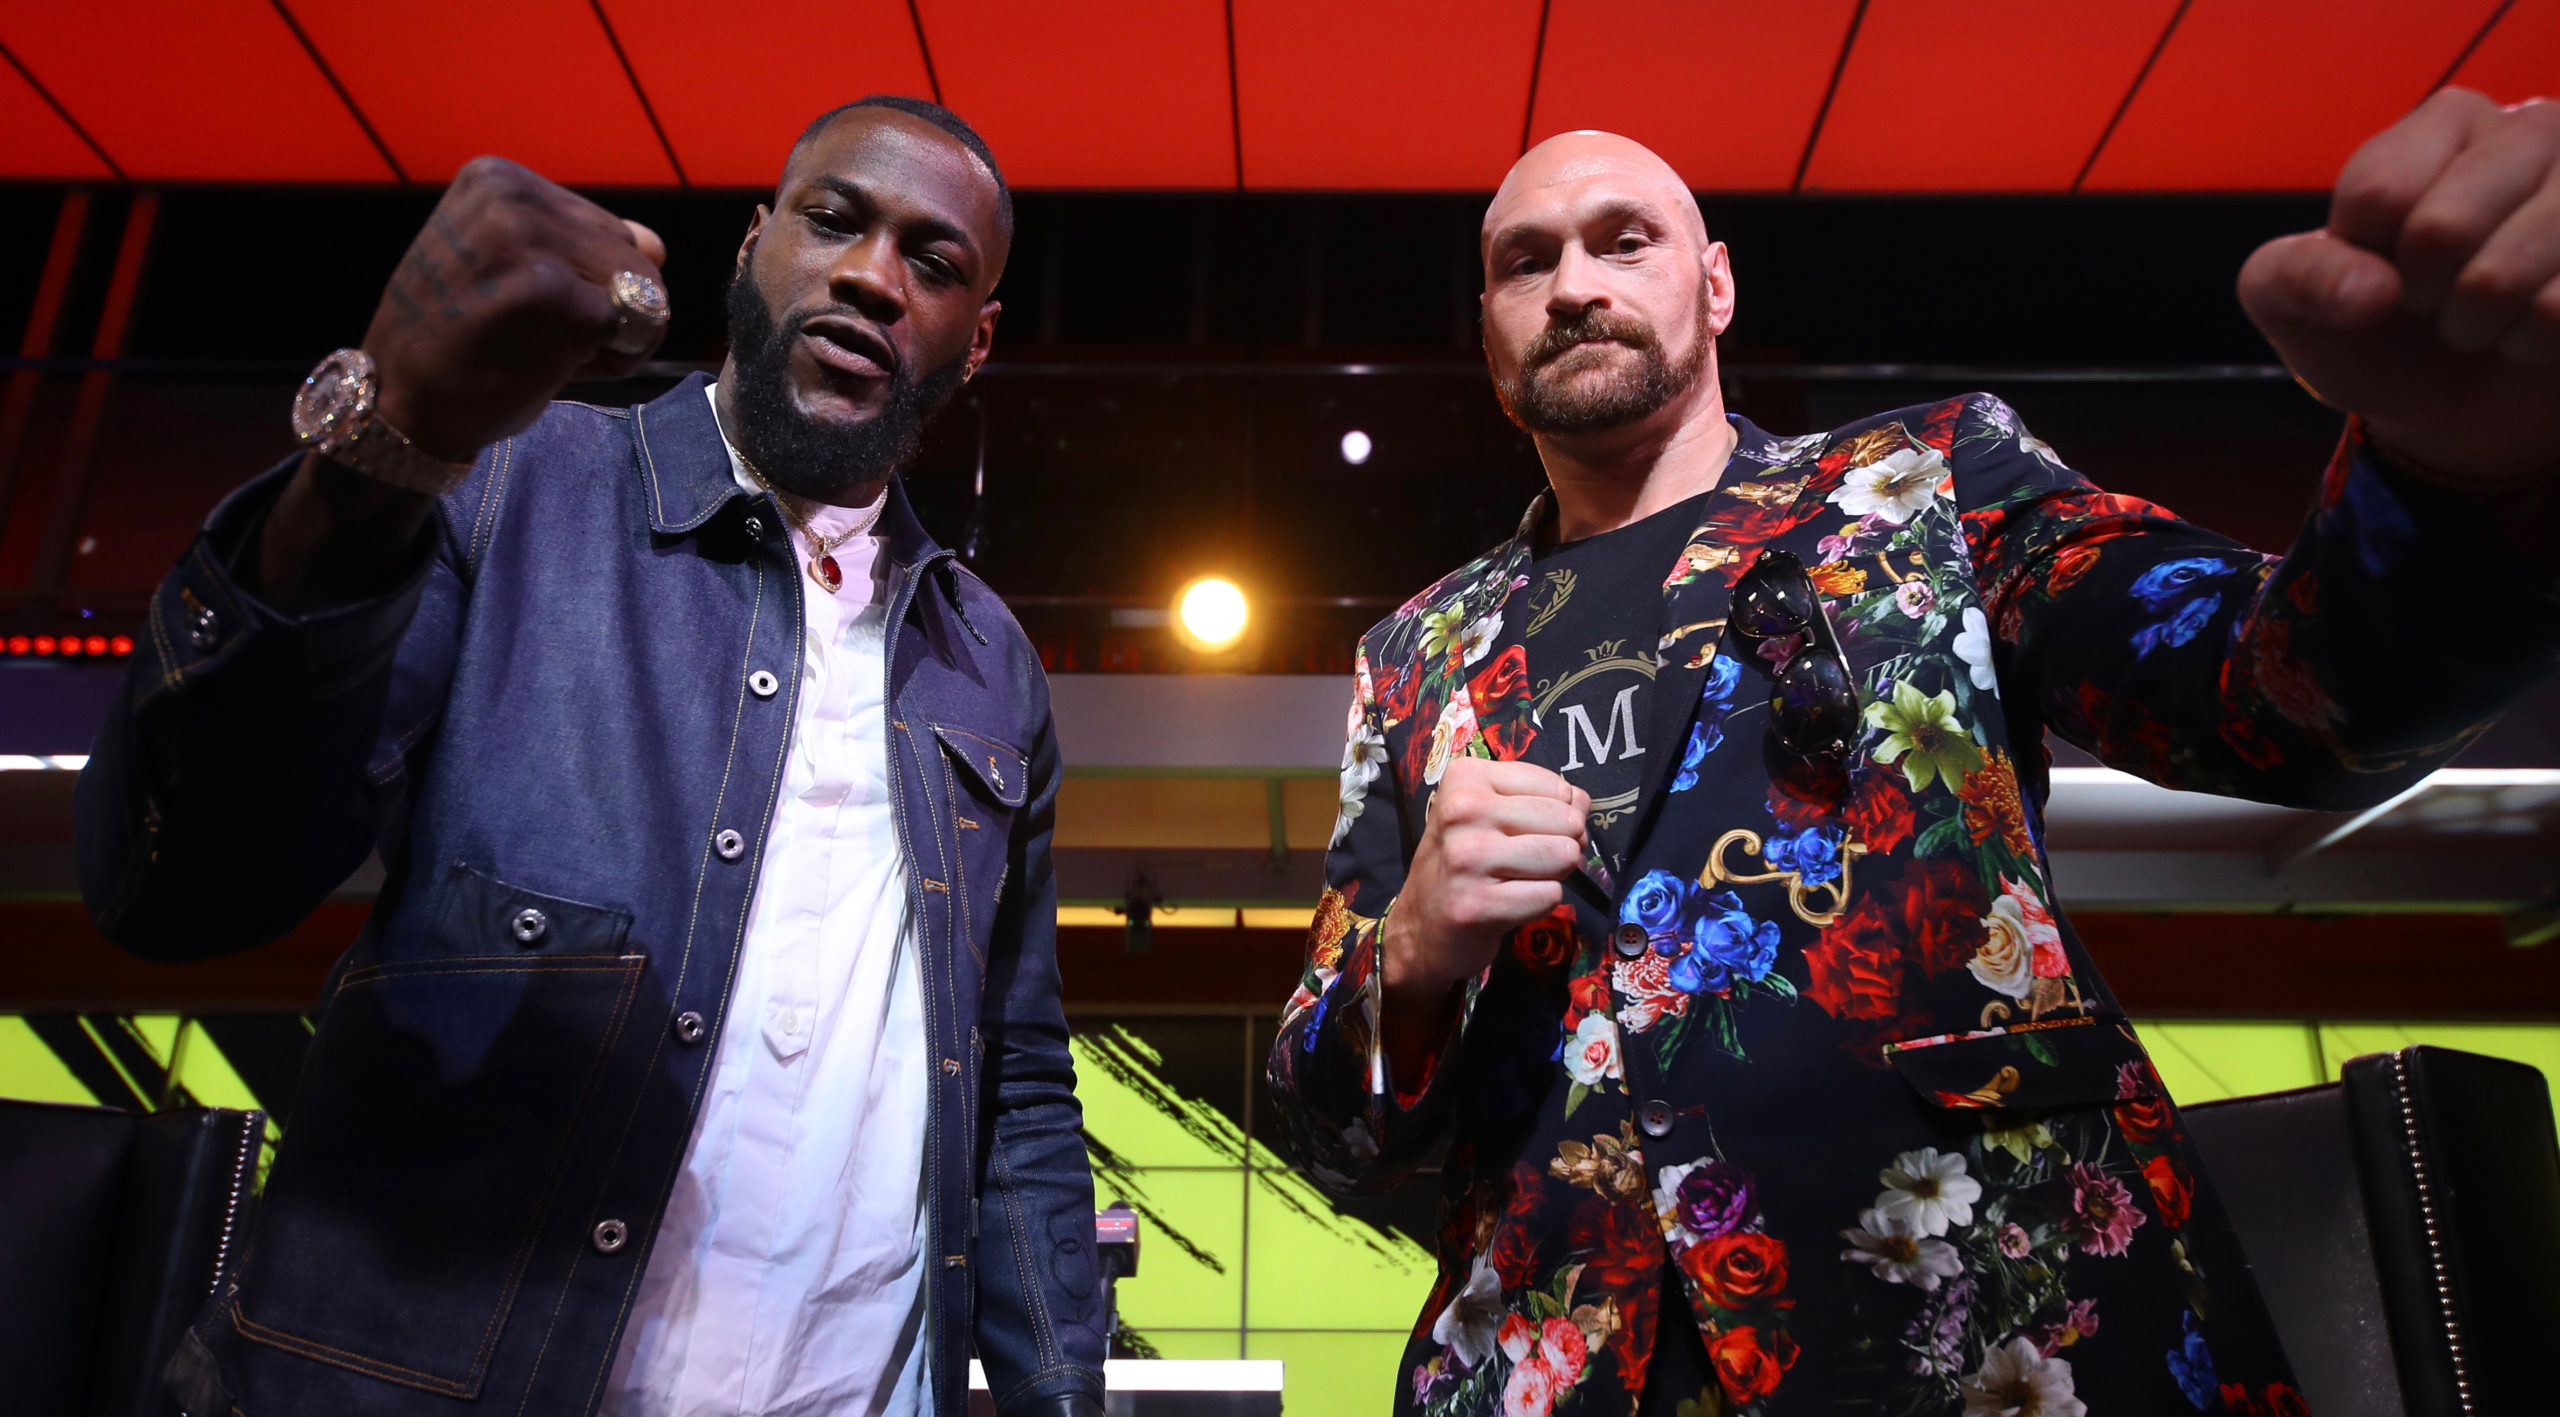 Fury vs Wilder 3: Date, Tickets, Betting, Venue, Location, Live Stream, Stats And Everything You Need To Know